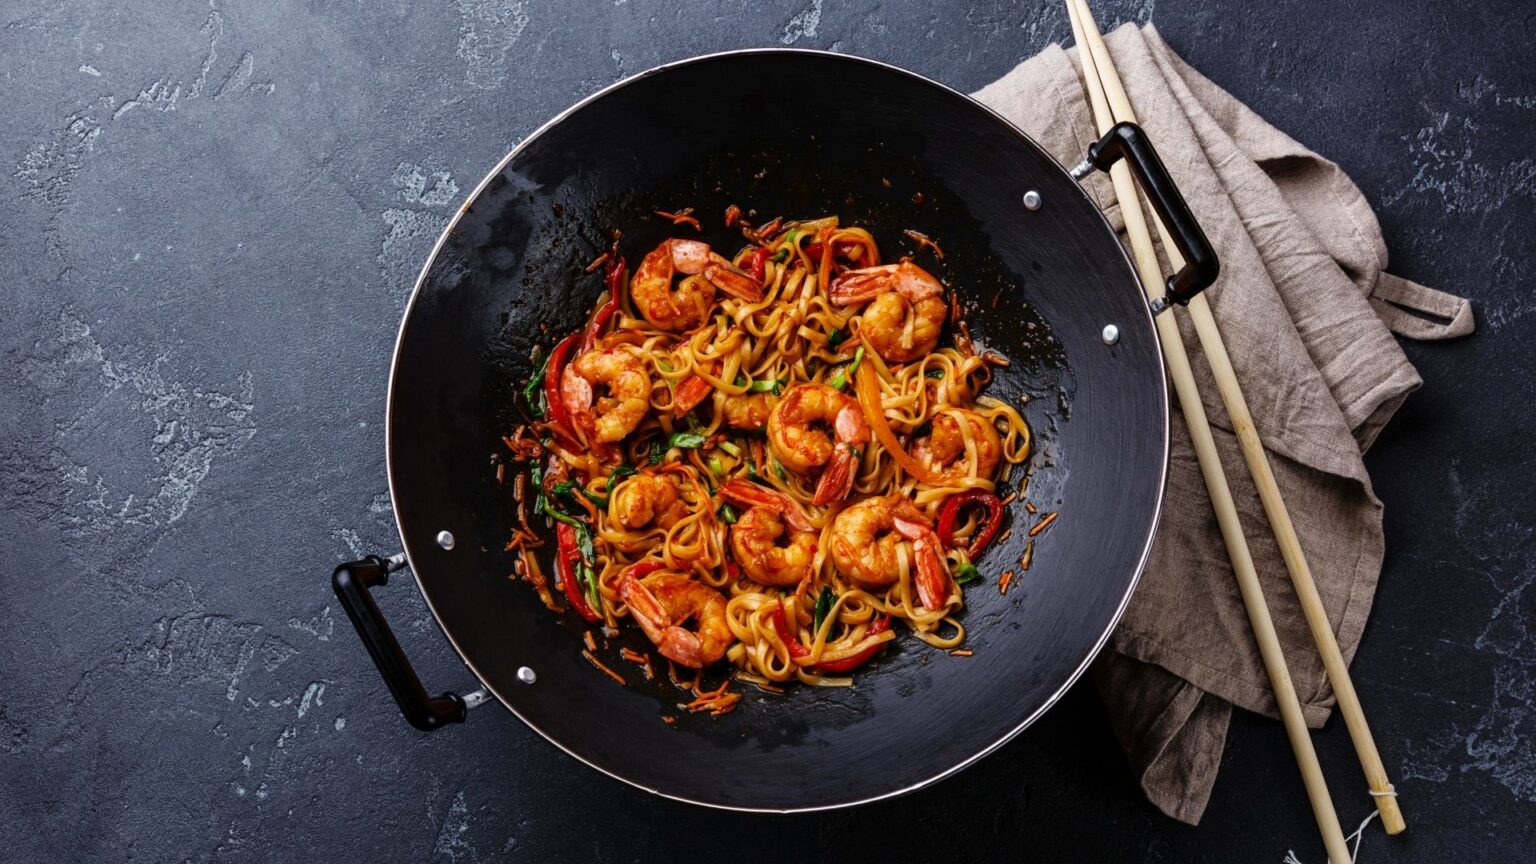 Guide to Buying the Best Wok Pan